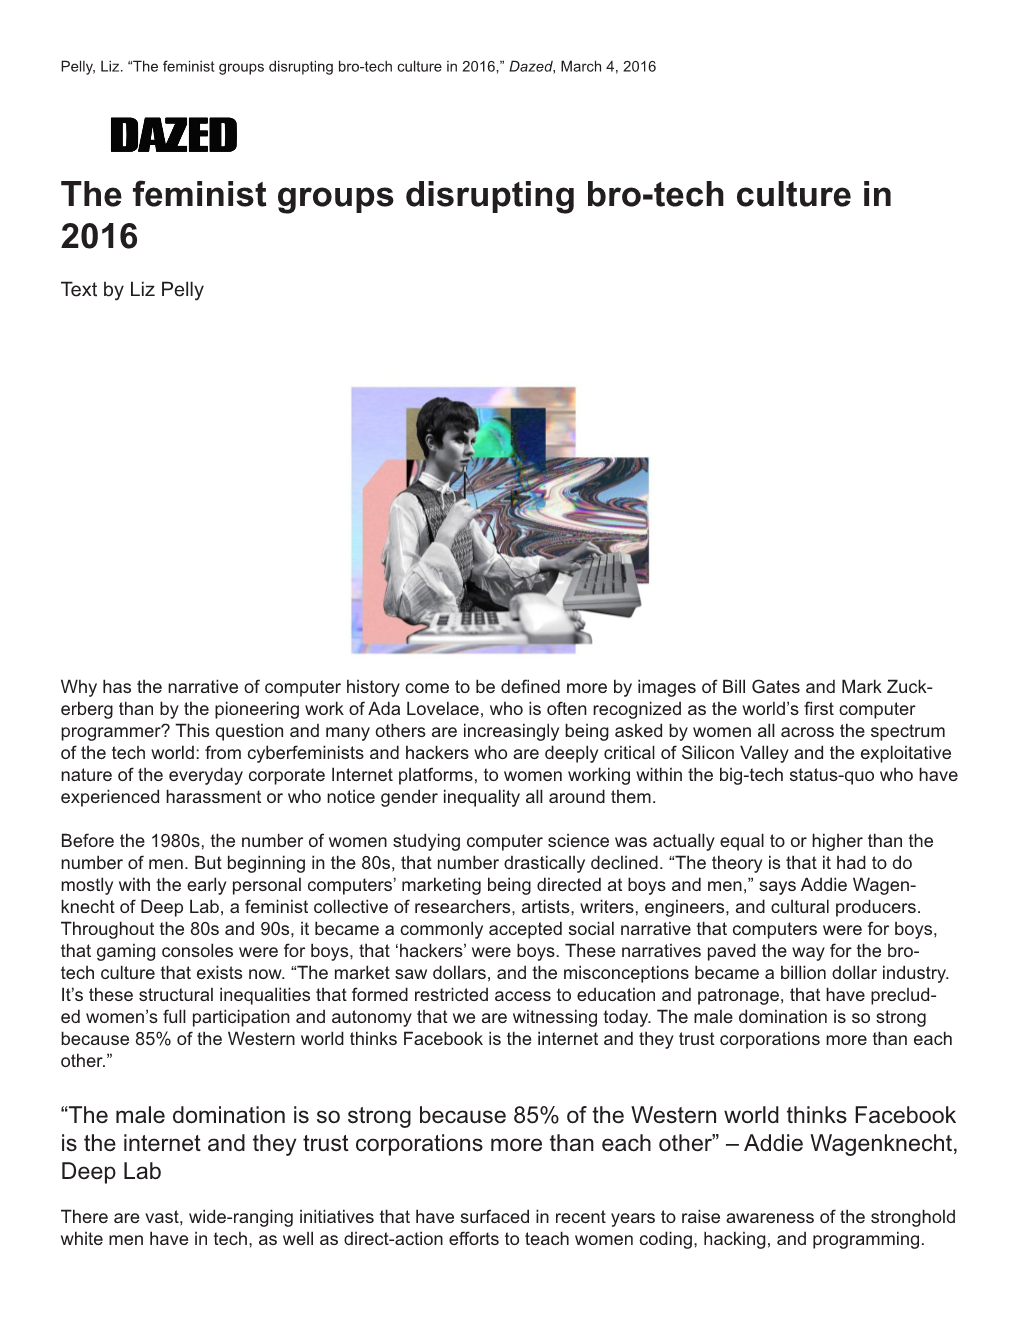 “The Feminist Groups Disrupting Bro-Tech Culture in 2016,” Dazed, March 4, 2016